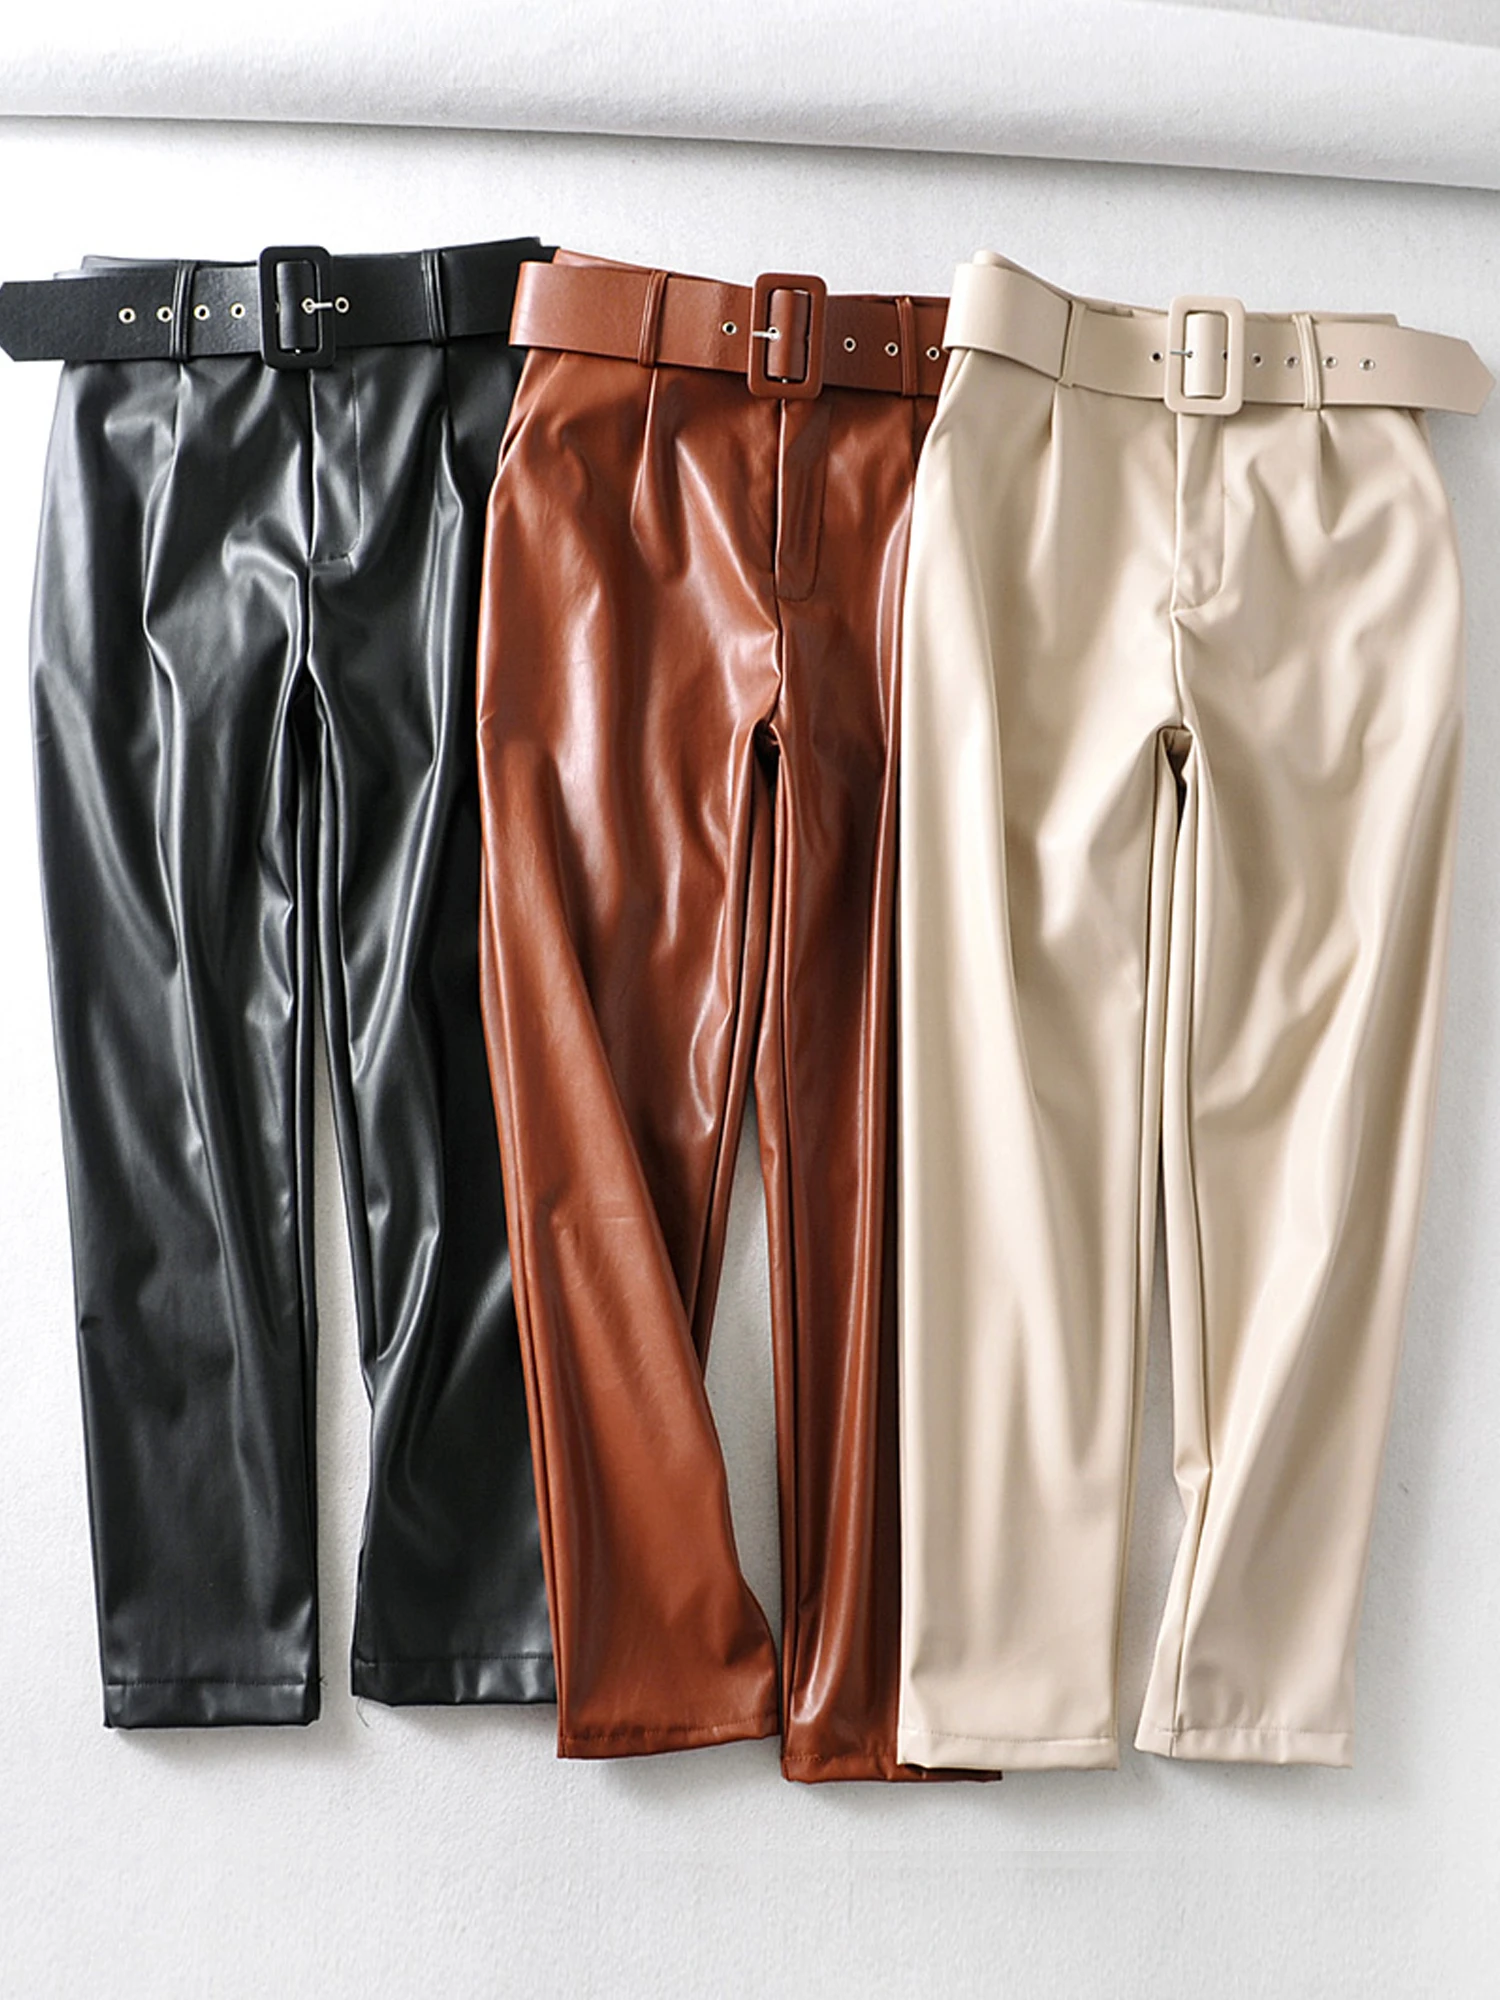 PU Leather High Waisted Pants Women Fashion Loose Faux Leather Trousers Women Elegant Pockets Pants Female Ladies 3 Color Beige